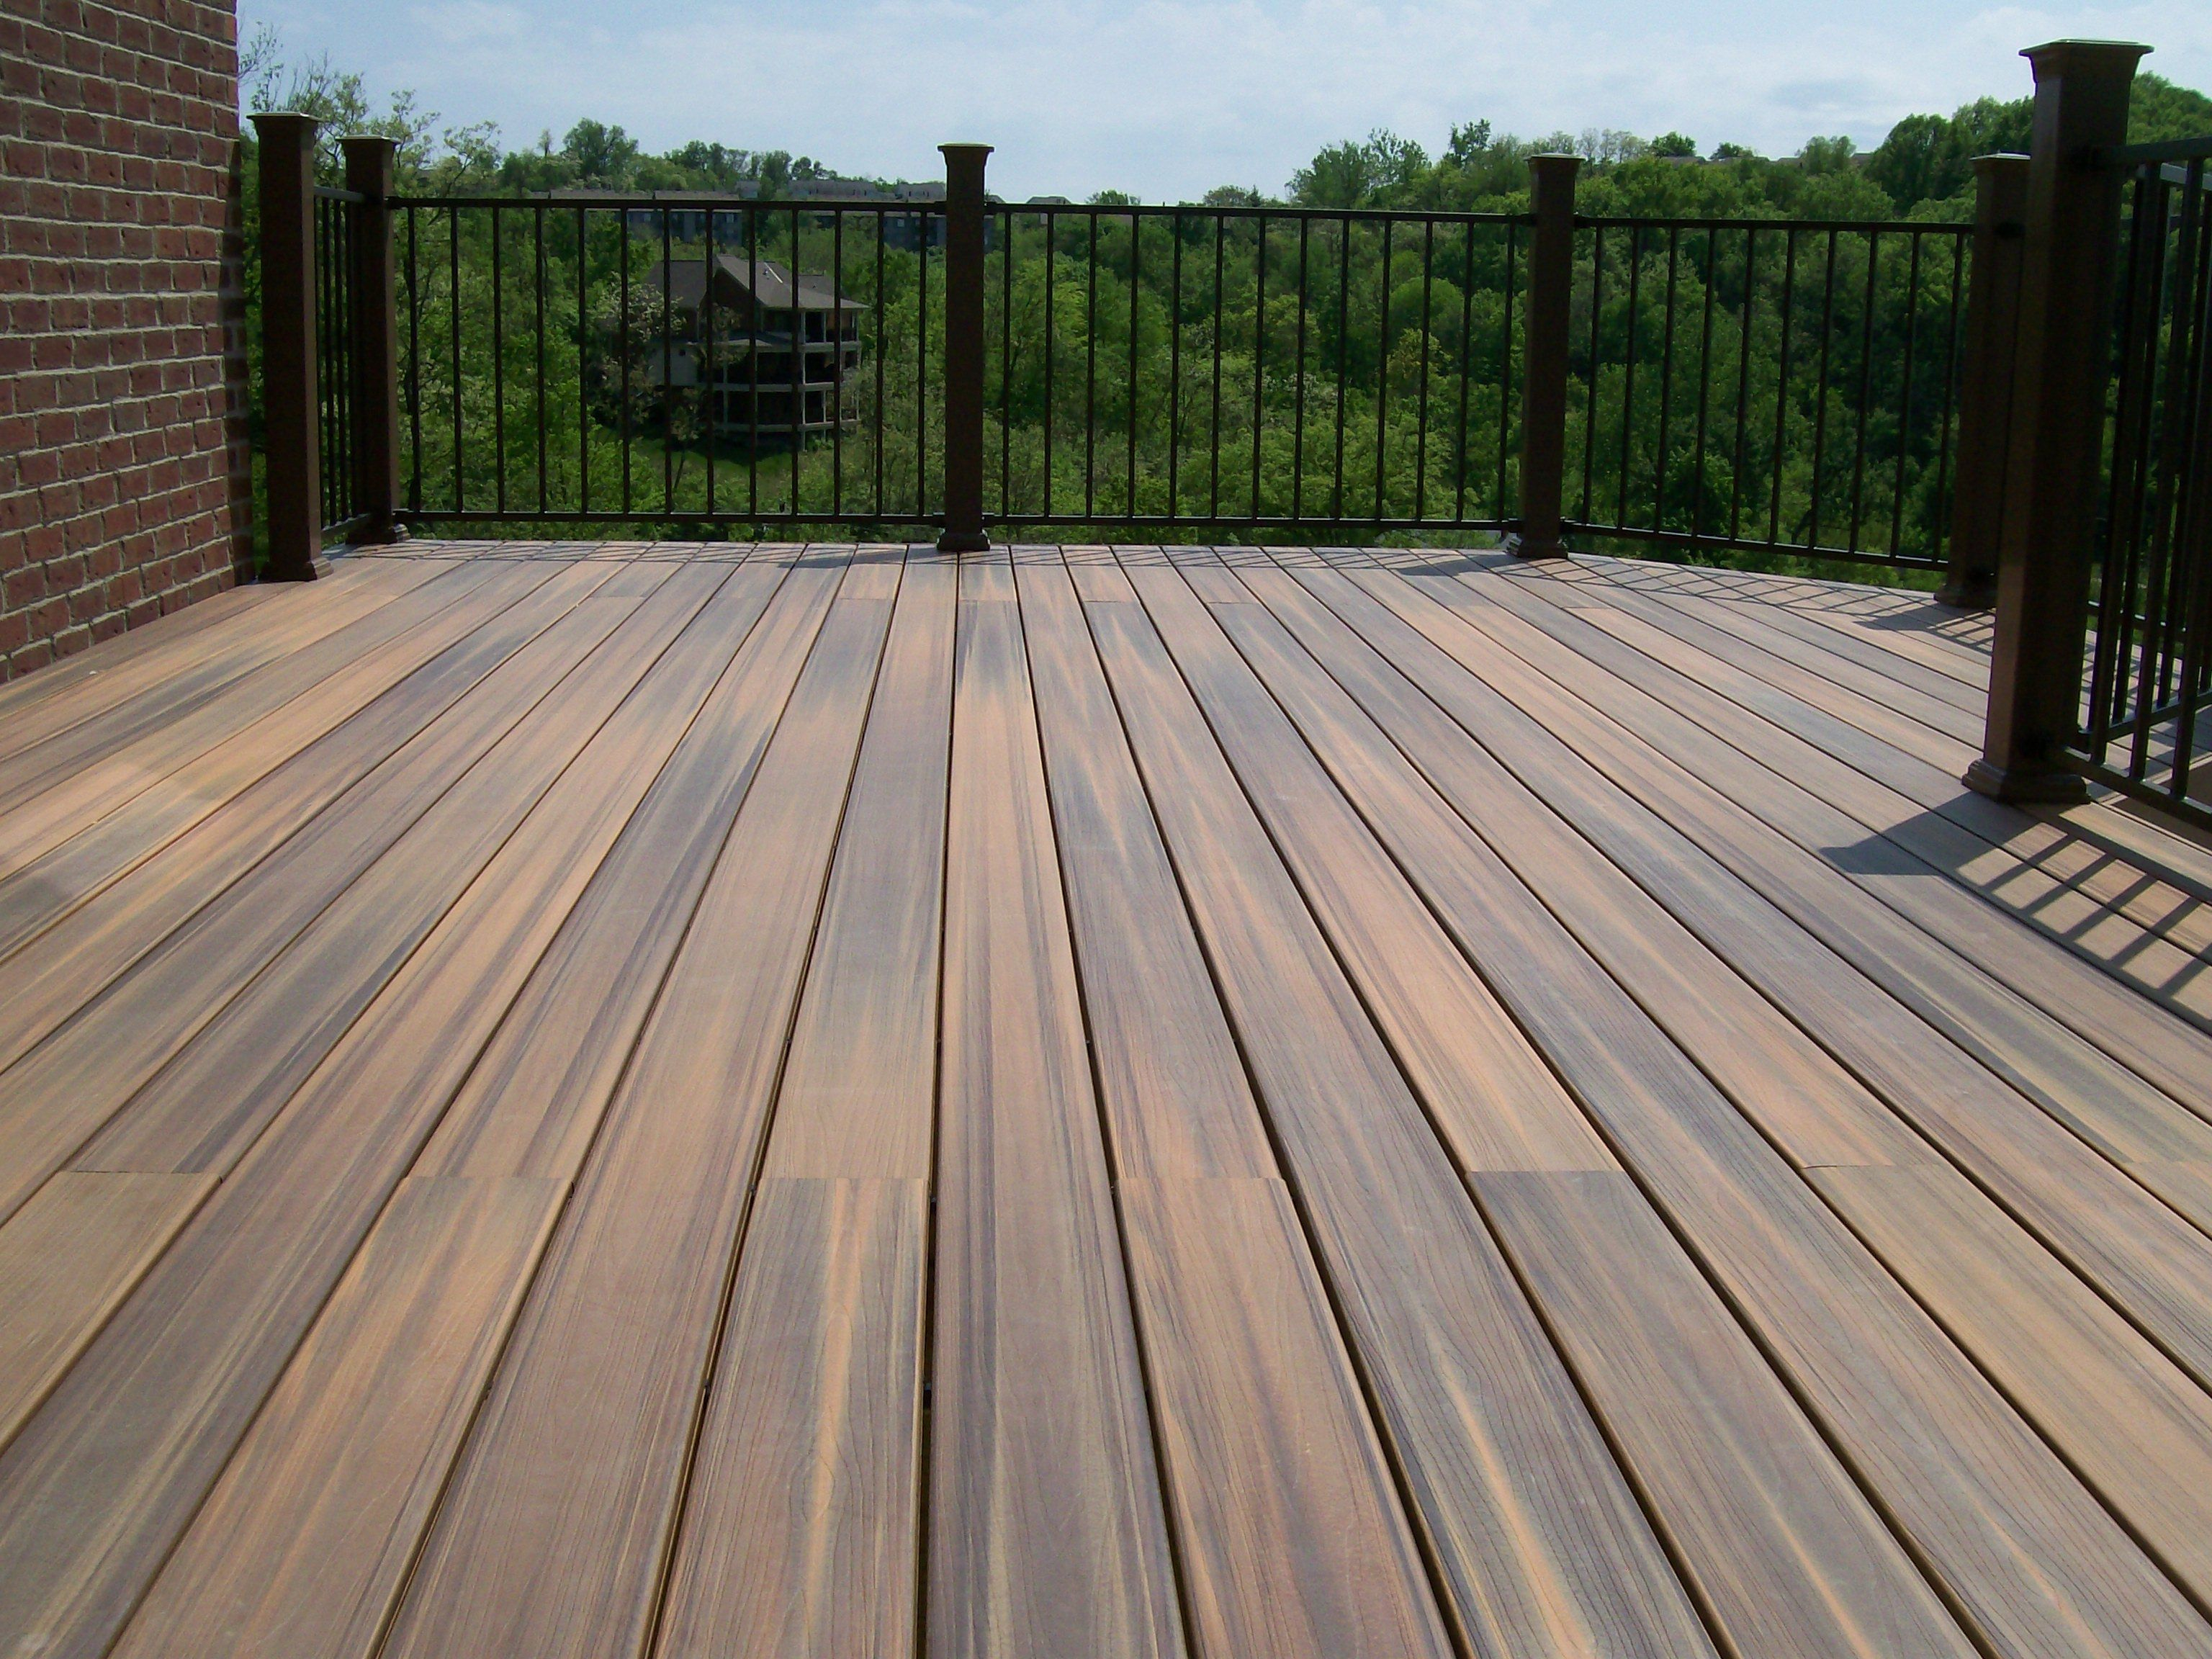 Best Decking Material 2016 Outdoors Decking Material Best throughout size 3072 X 2304